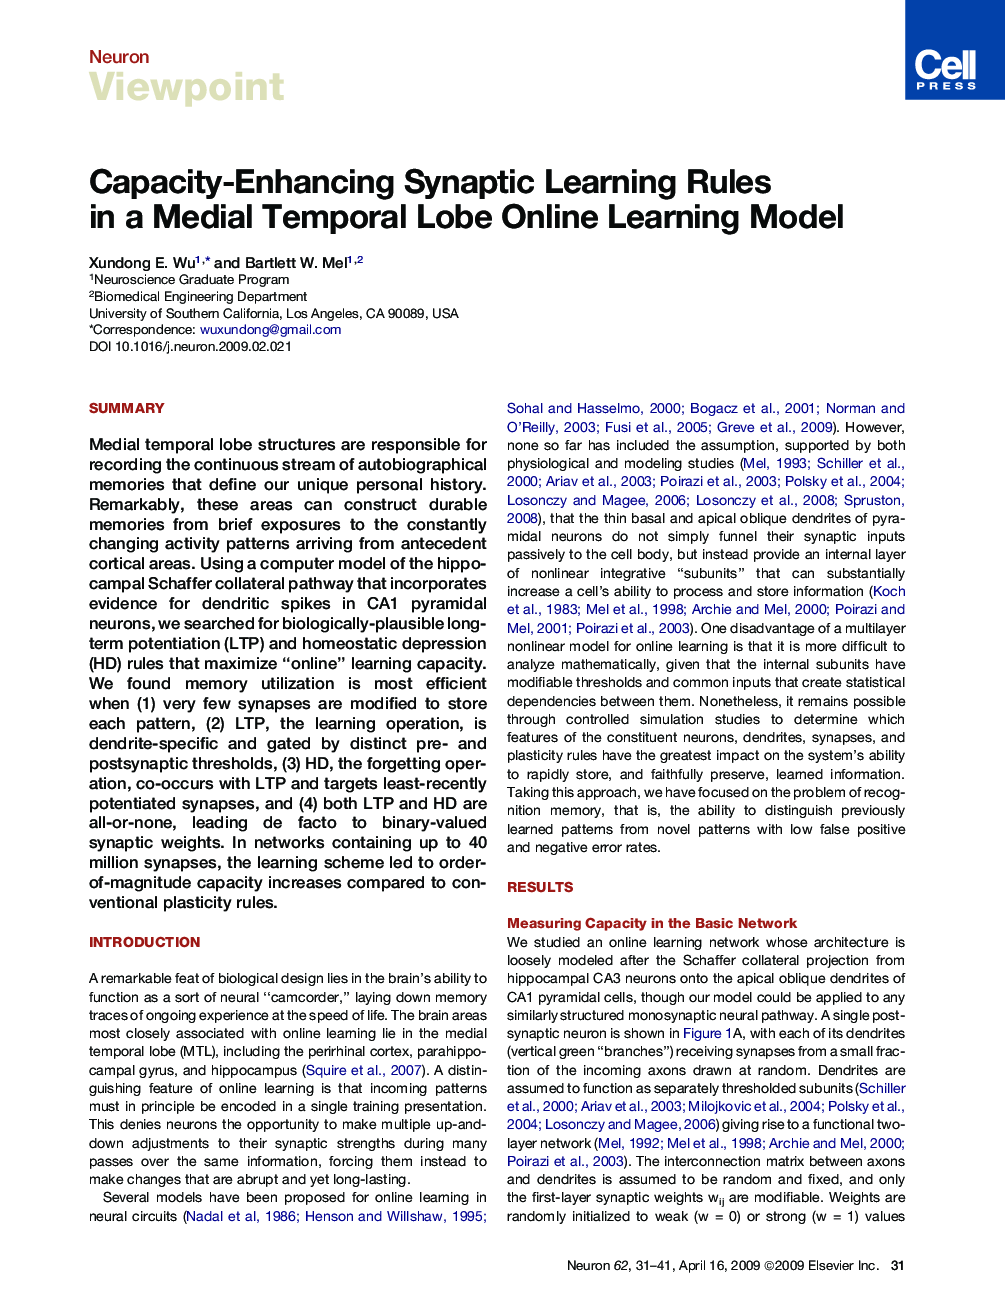 Capacity-Enhancing Synaptic Learning Rules in a Medial Temporal Lobe Online Learning Model